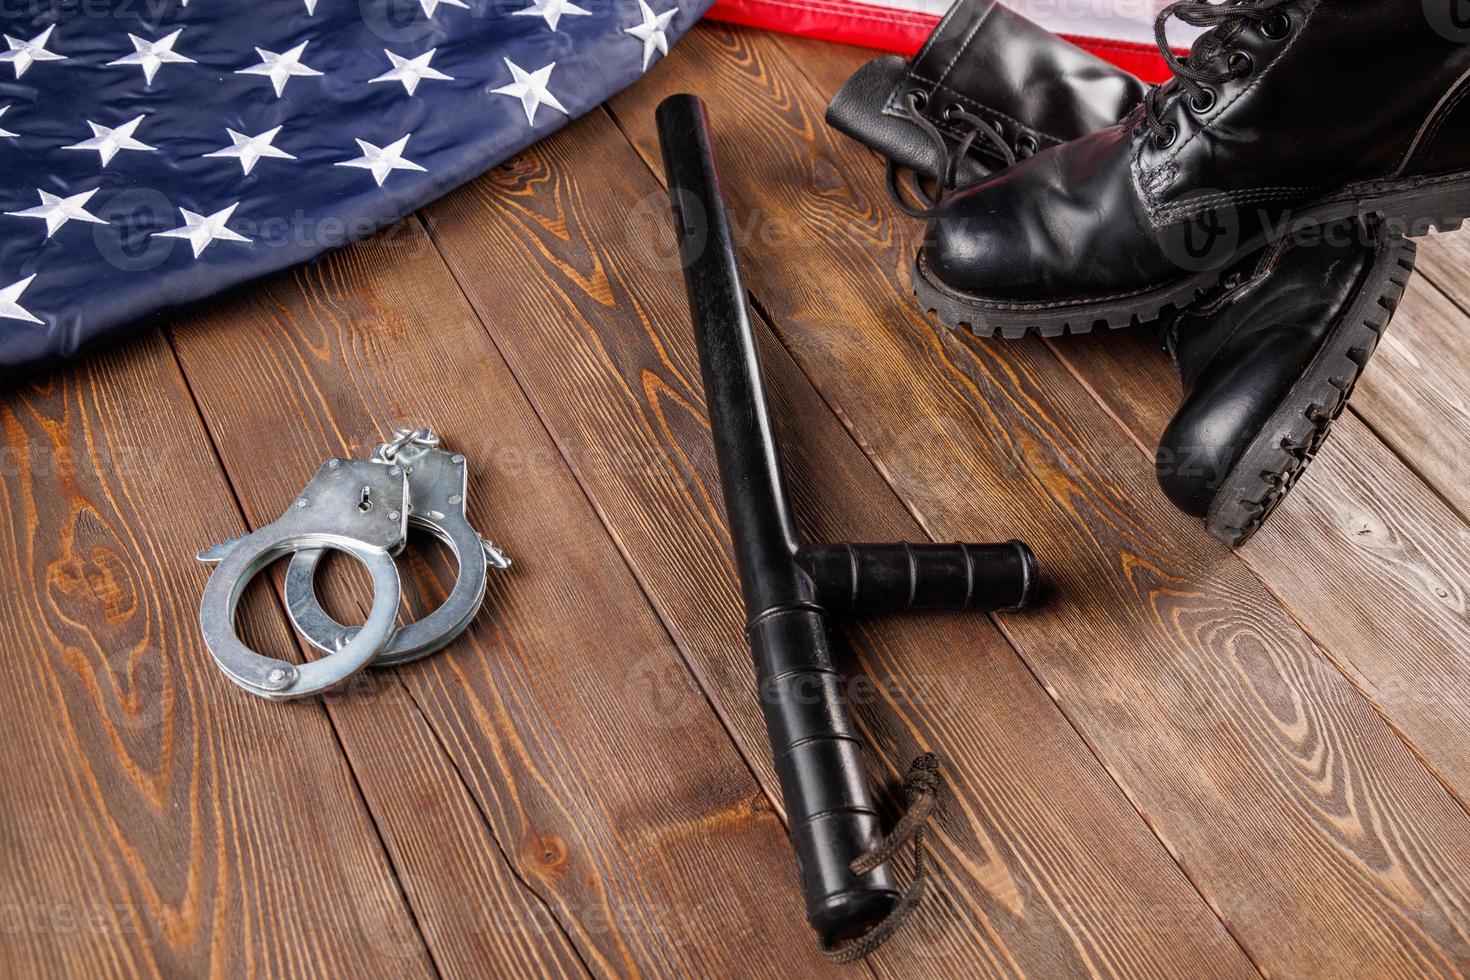 silver metal handcuffs, black ankle boots and police nightstick near US flag on wooden surface photo